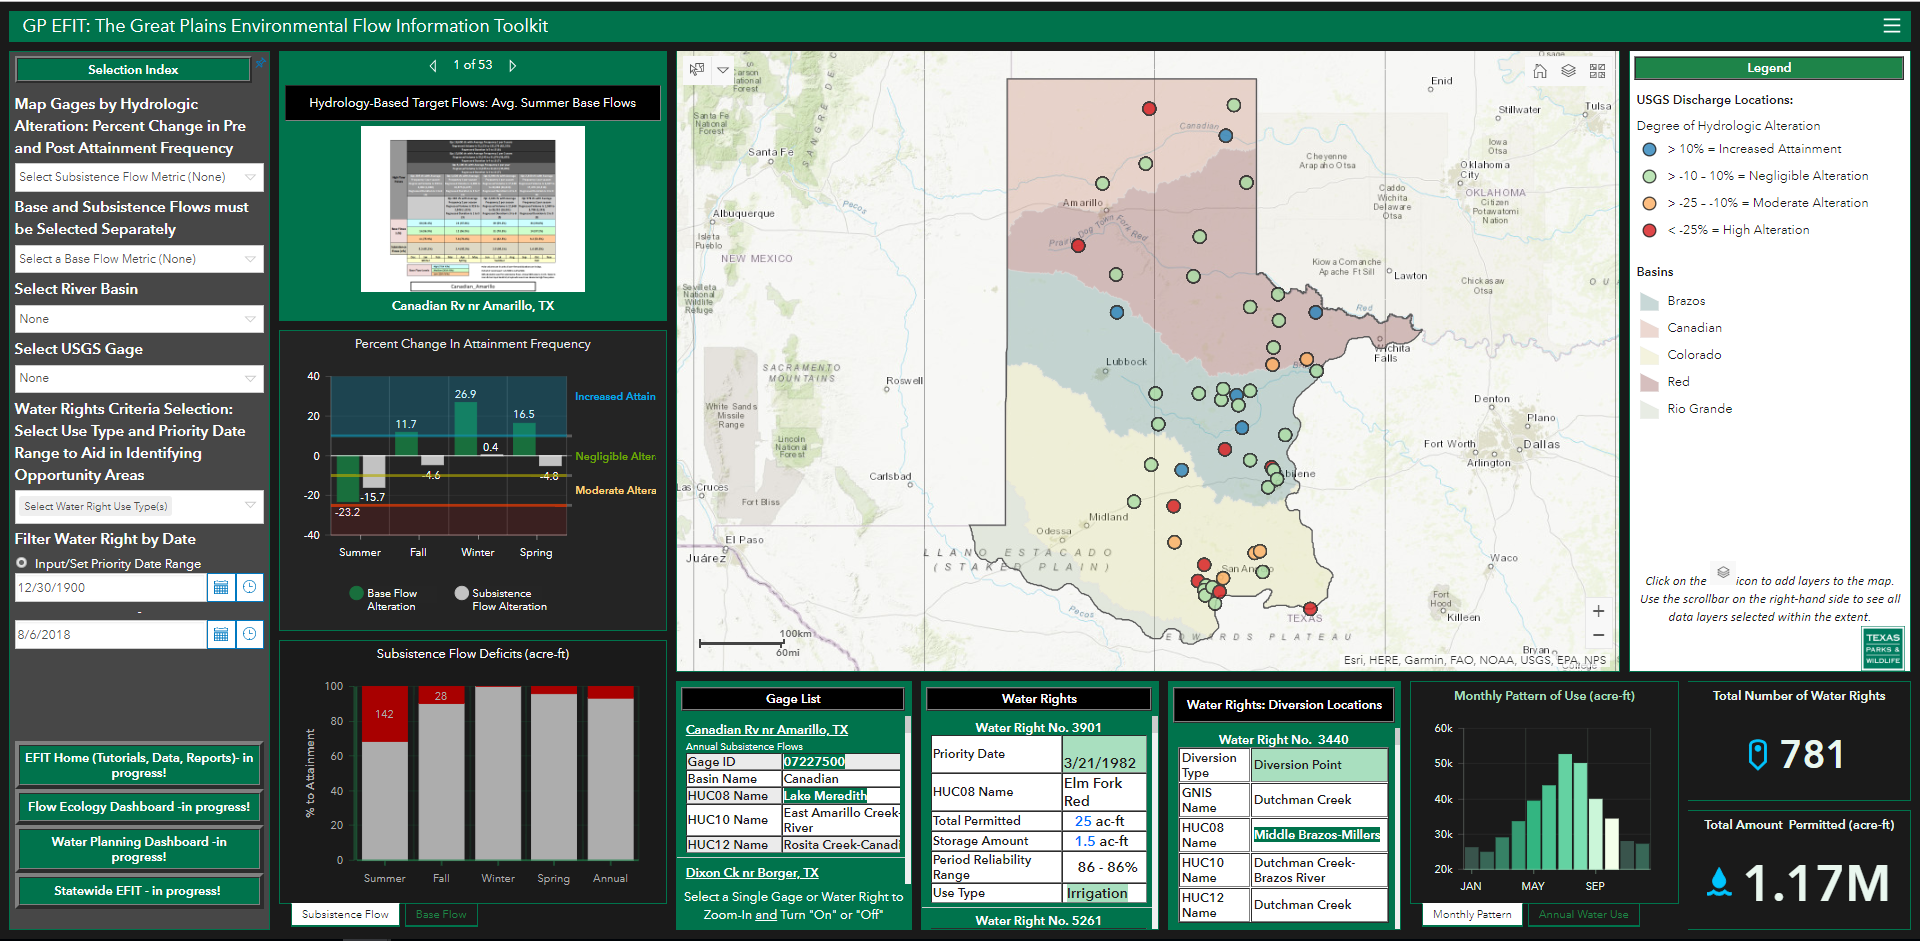 Picture of the GP EFIT Hydrology Dashboard user interface.